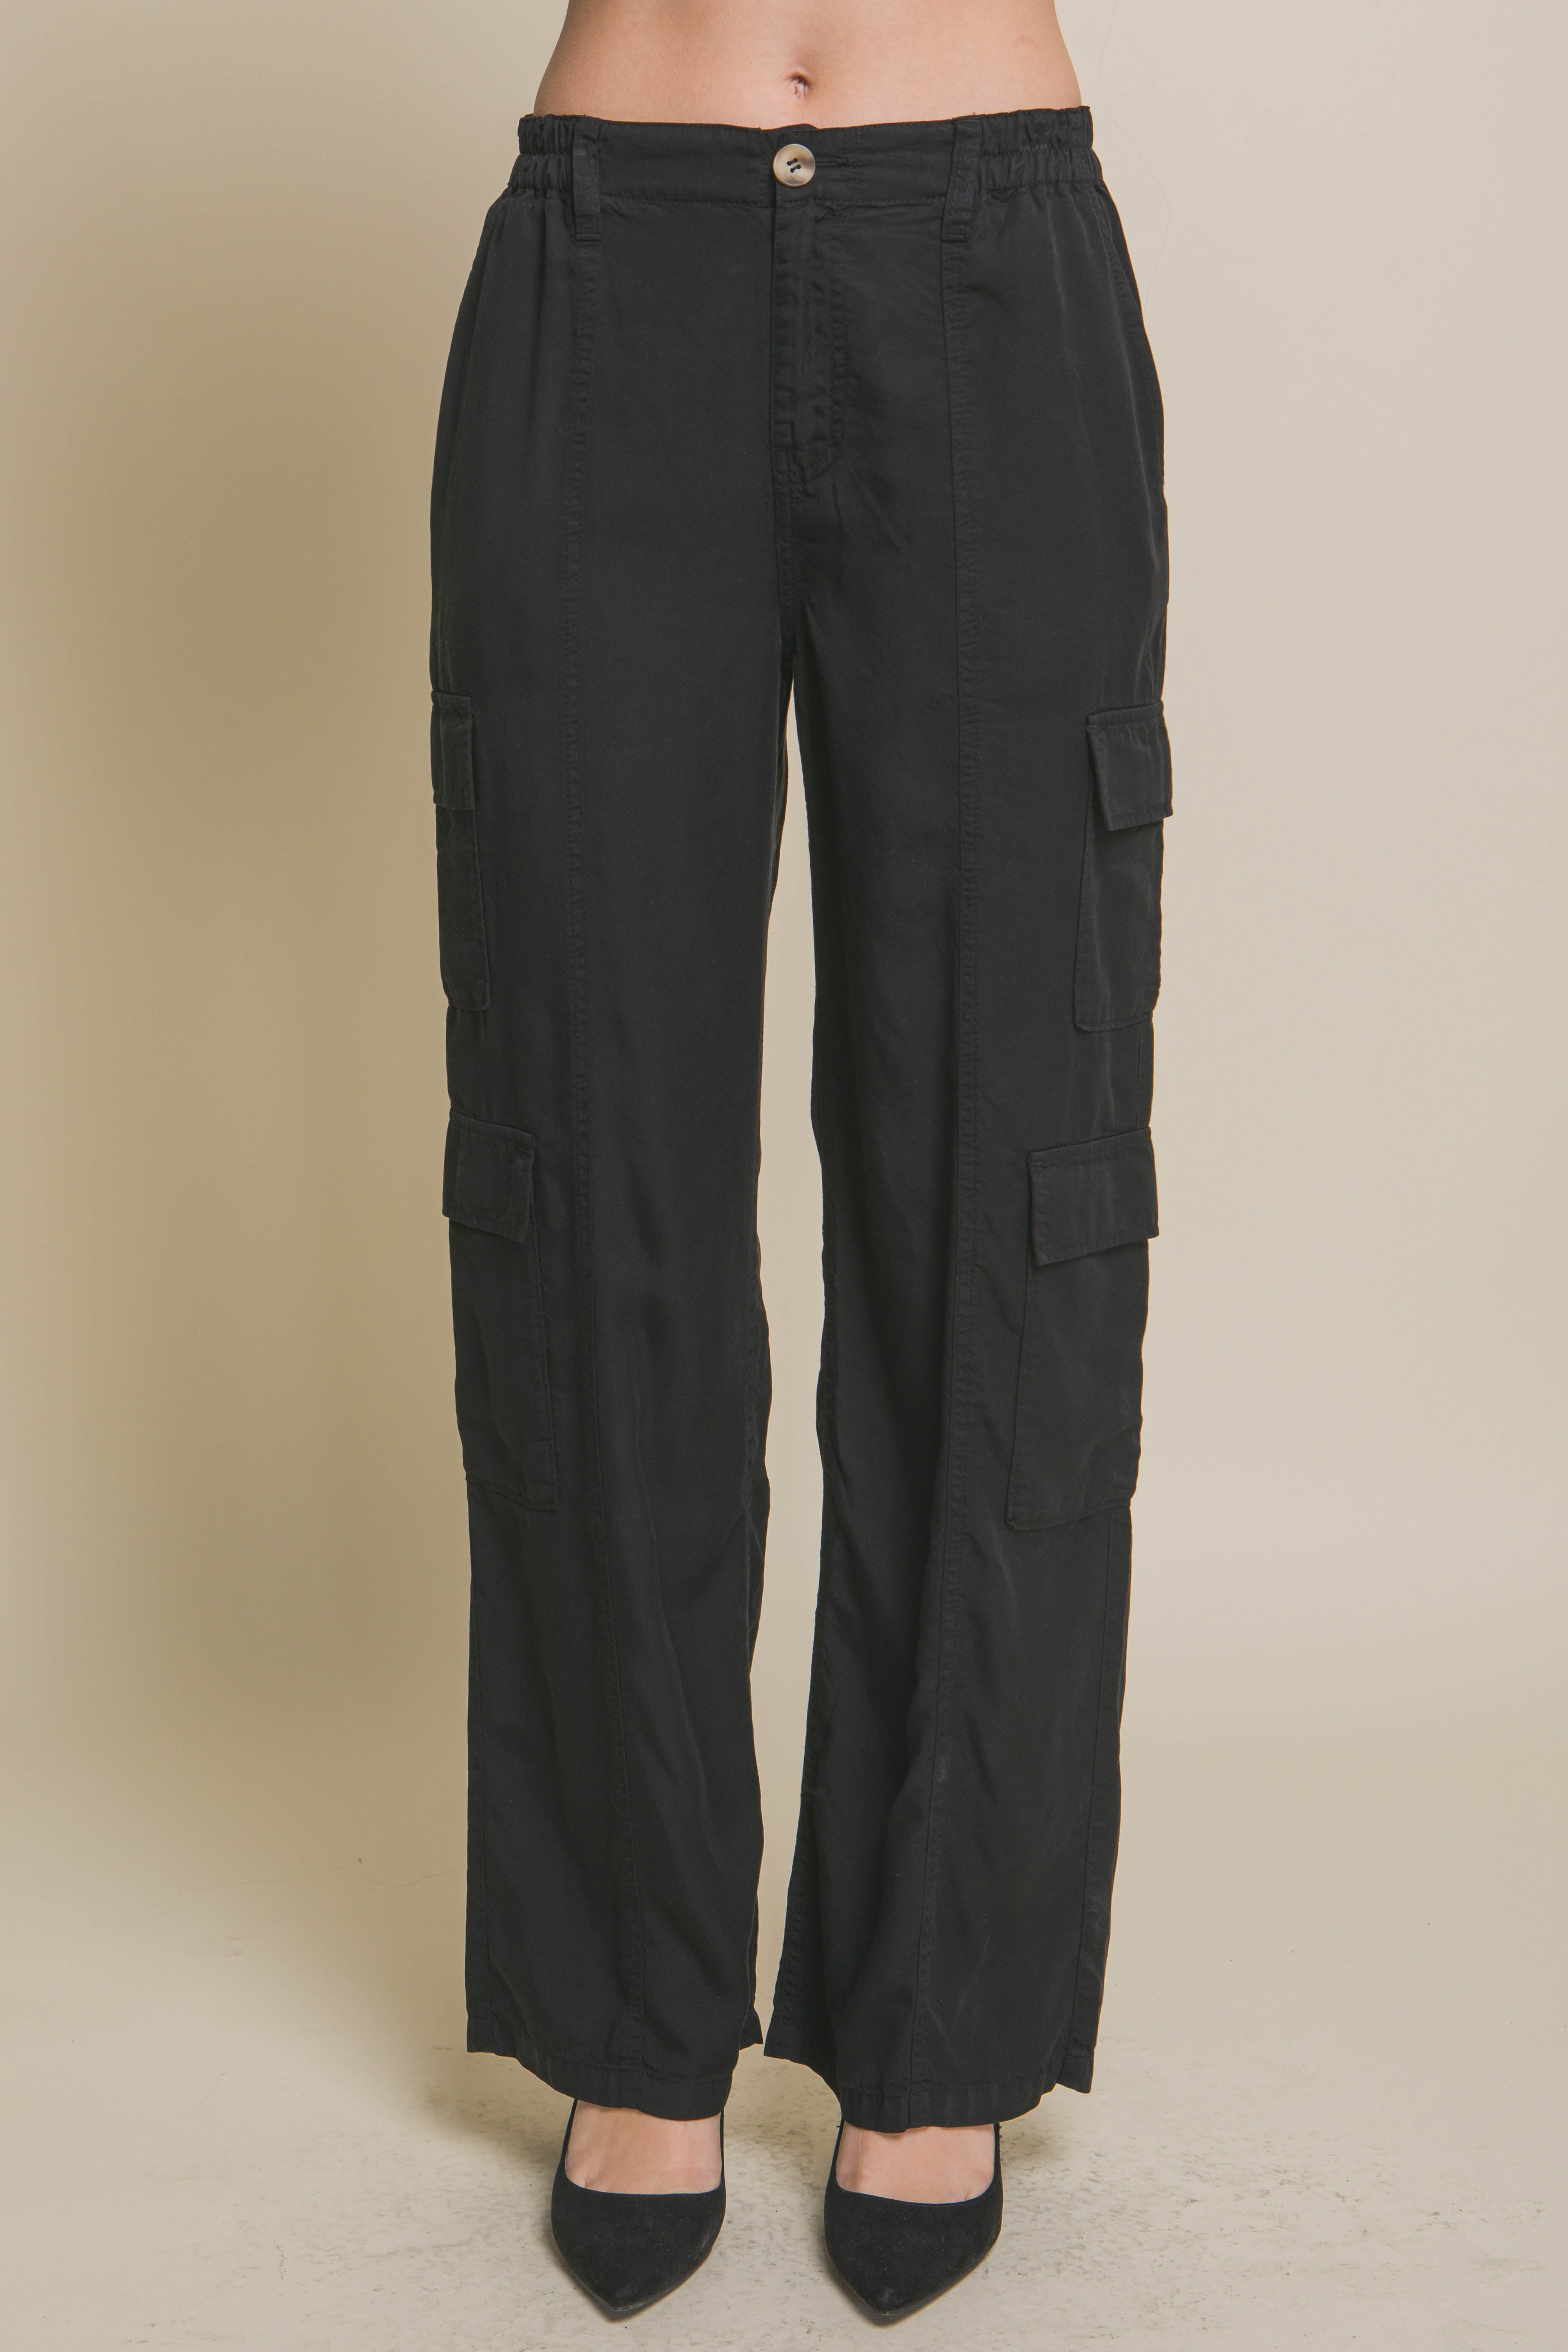 Black - Full-length Women's Tencel Pants With Cargo Pockets - womens pants at TFC&H Co.